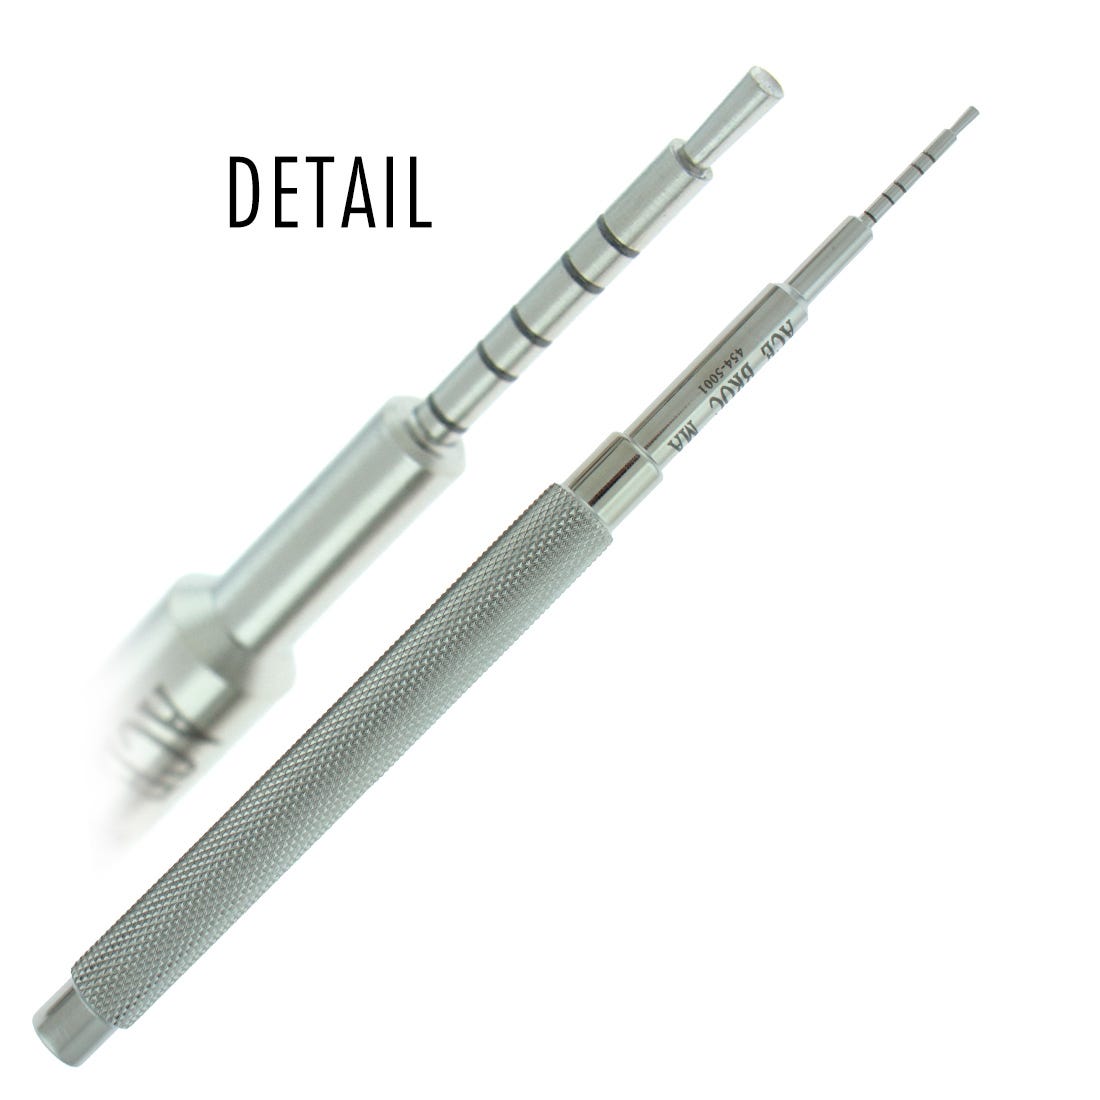 ACE Sinus Lift Osteotome Step 1.6mm/2.0mm